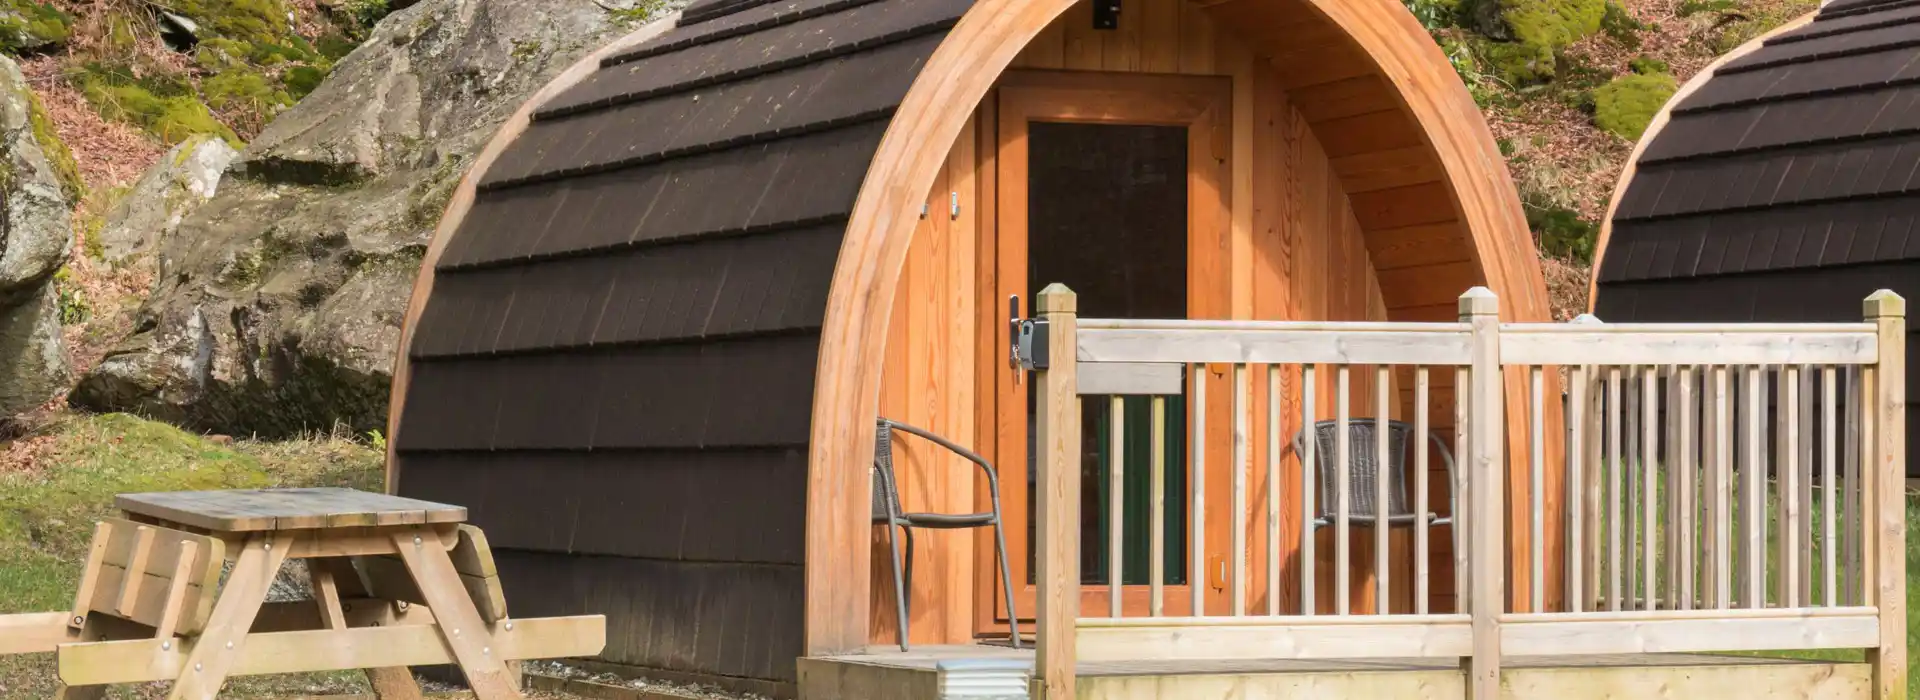 Swansea camping and glamping pods